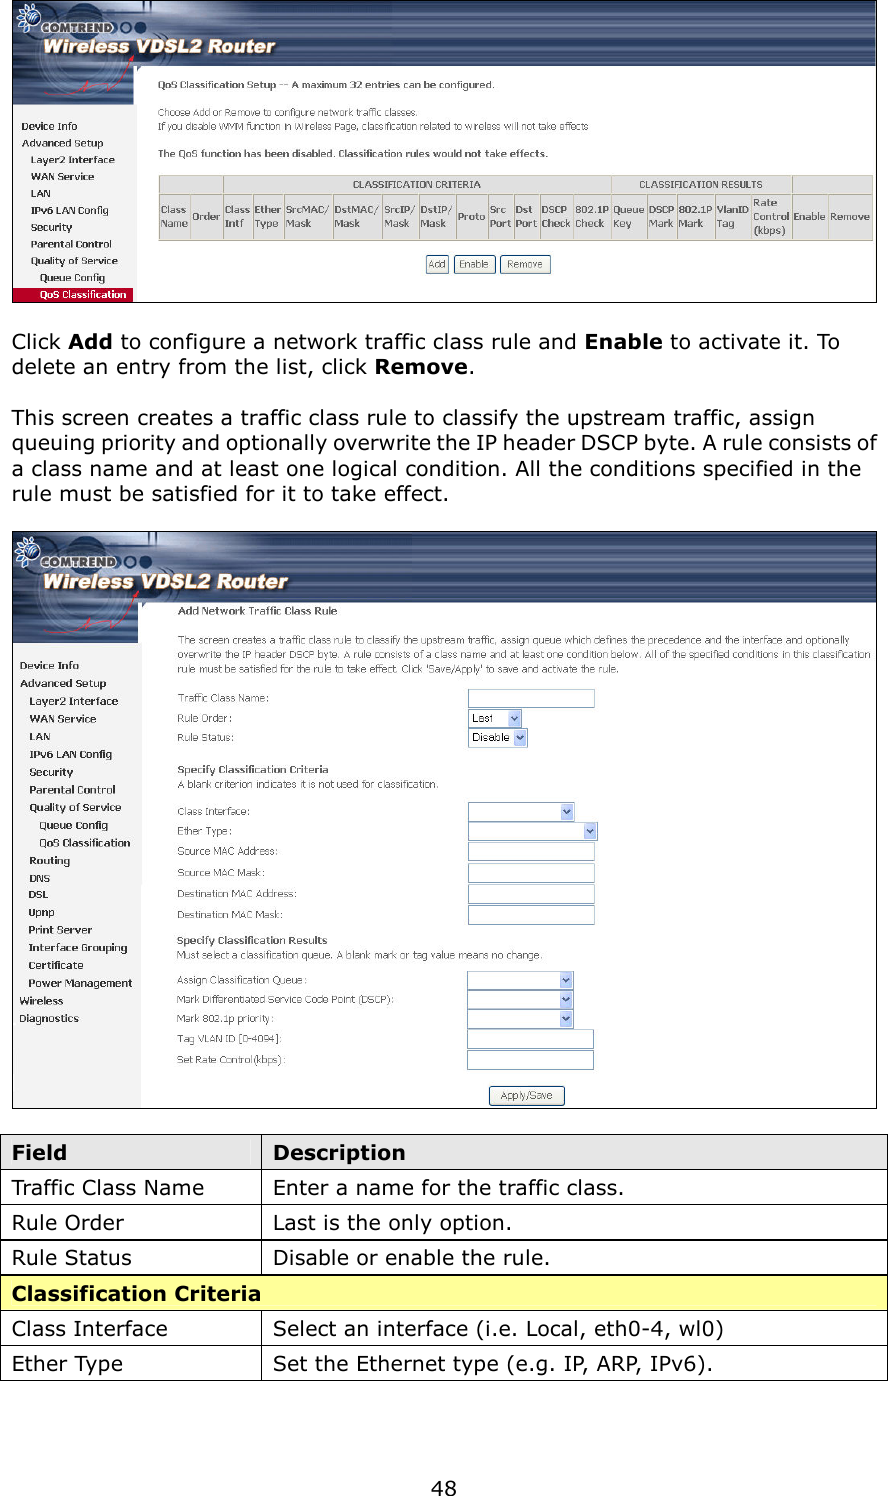   48   Click Add to configure a network traffic class rule and Enable to activate it. To delete an entry from the list, click Remove.  This screen creates a traffic class rule to classify the upstream traffic, assign queuing priority and optionally overwrite the IP header DSCP byte. A rule consists of a class name and at least one logical condition. All the conditions specified in the rule must be satisfied for it to take effect.      Field  Description Traffic Class Name  Enter a name for the traffic class. Rule Order  Last is the only option. Rule Status  Disable or enable the rule. Classification Criteria Class Interface Select an interface (i.e. Local, eth0-4, wl0) Ether Type  Set the Ethernet type (e.g. IP, ARP, IPv6). 